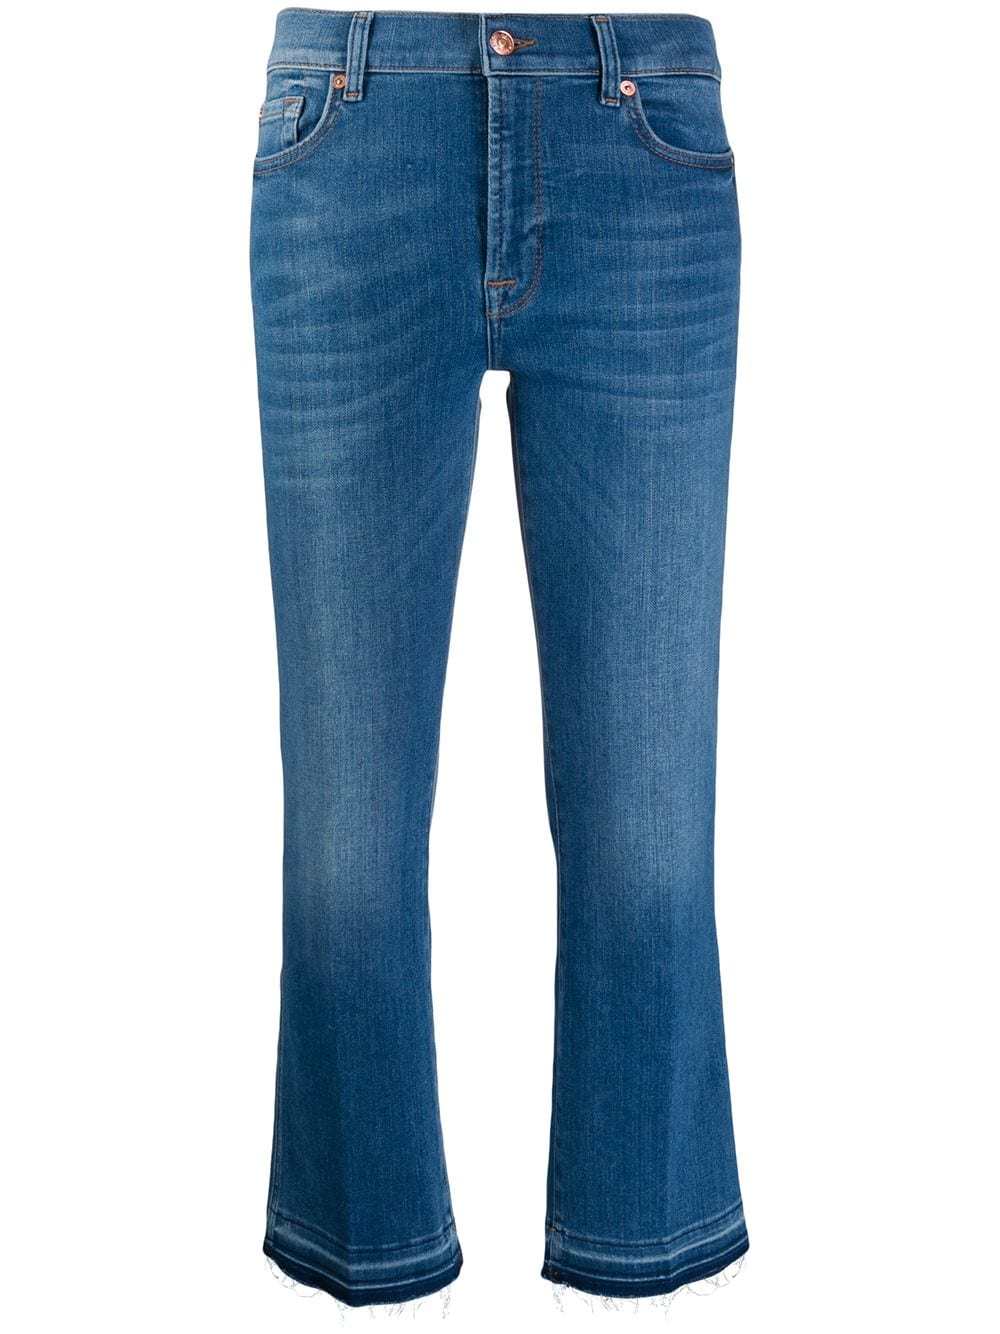 7 For All Mankind mid rise cropped jeans - Blue von 7 For All Mankind